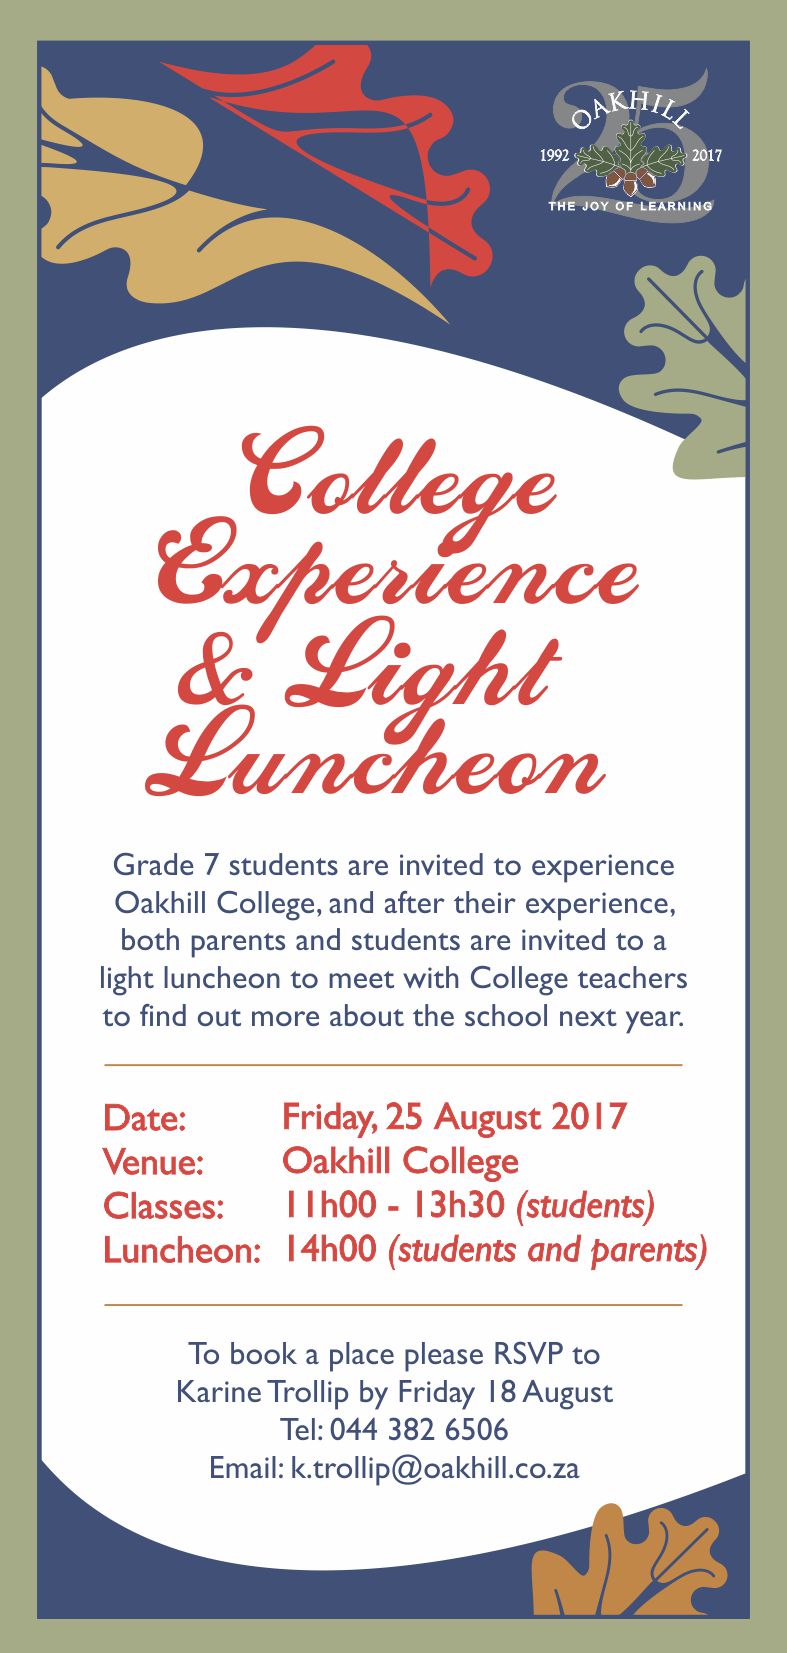 College Experience & Luncheon 2017